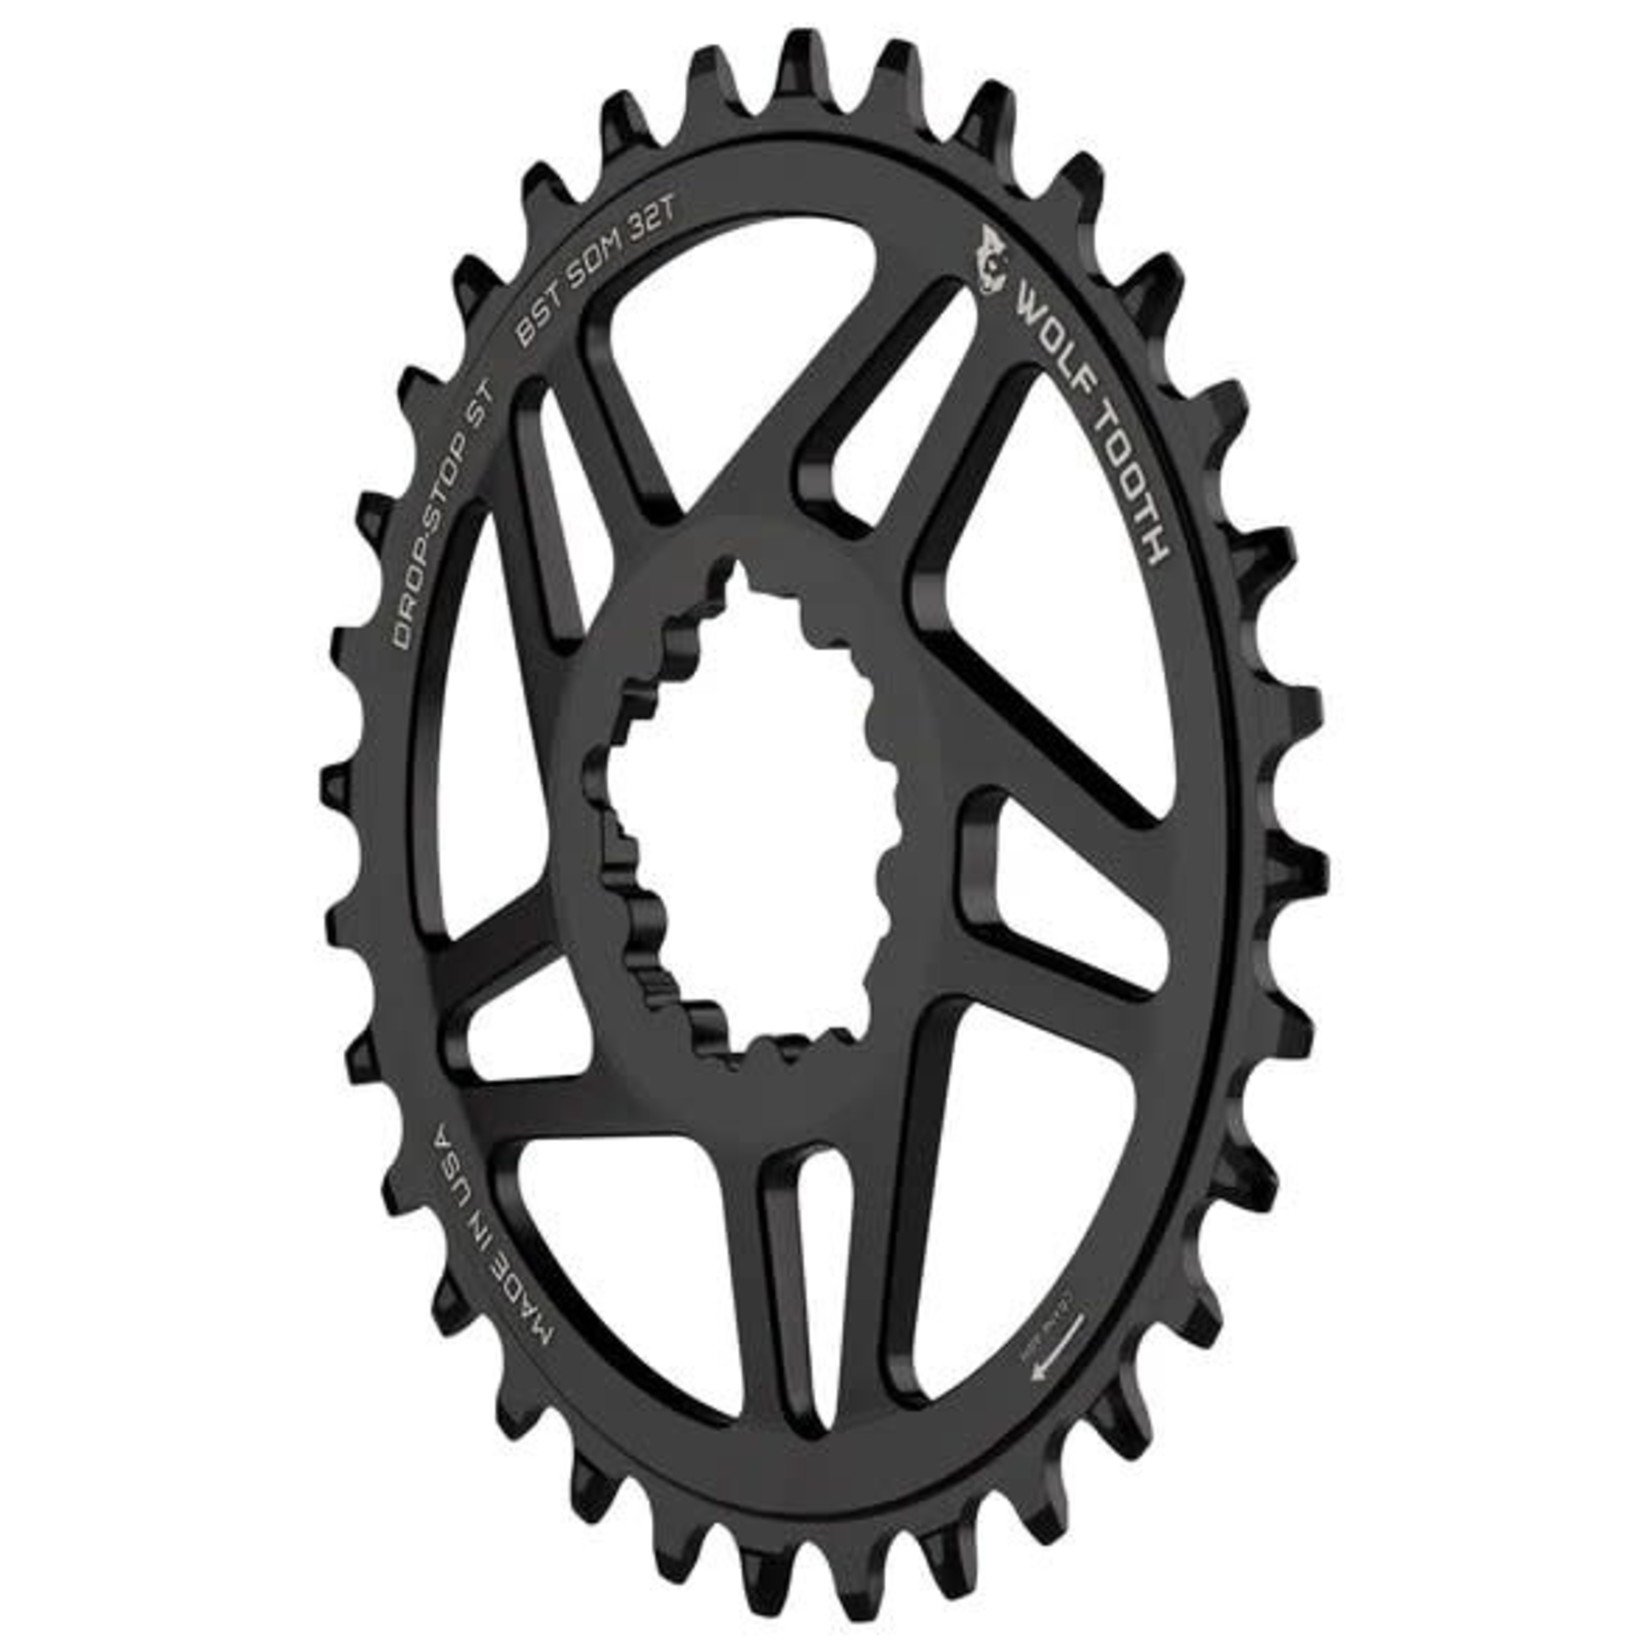 Wolf Tooth Components Wolf Tooth Direct Mount chainring for SRAM BB30 Short Spindle Cranks - BB30 32T